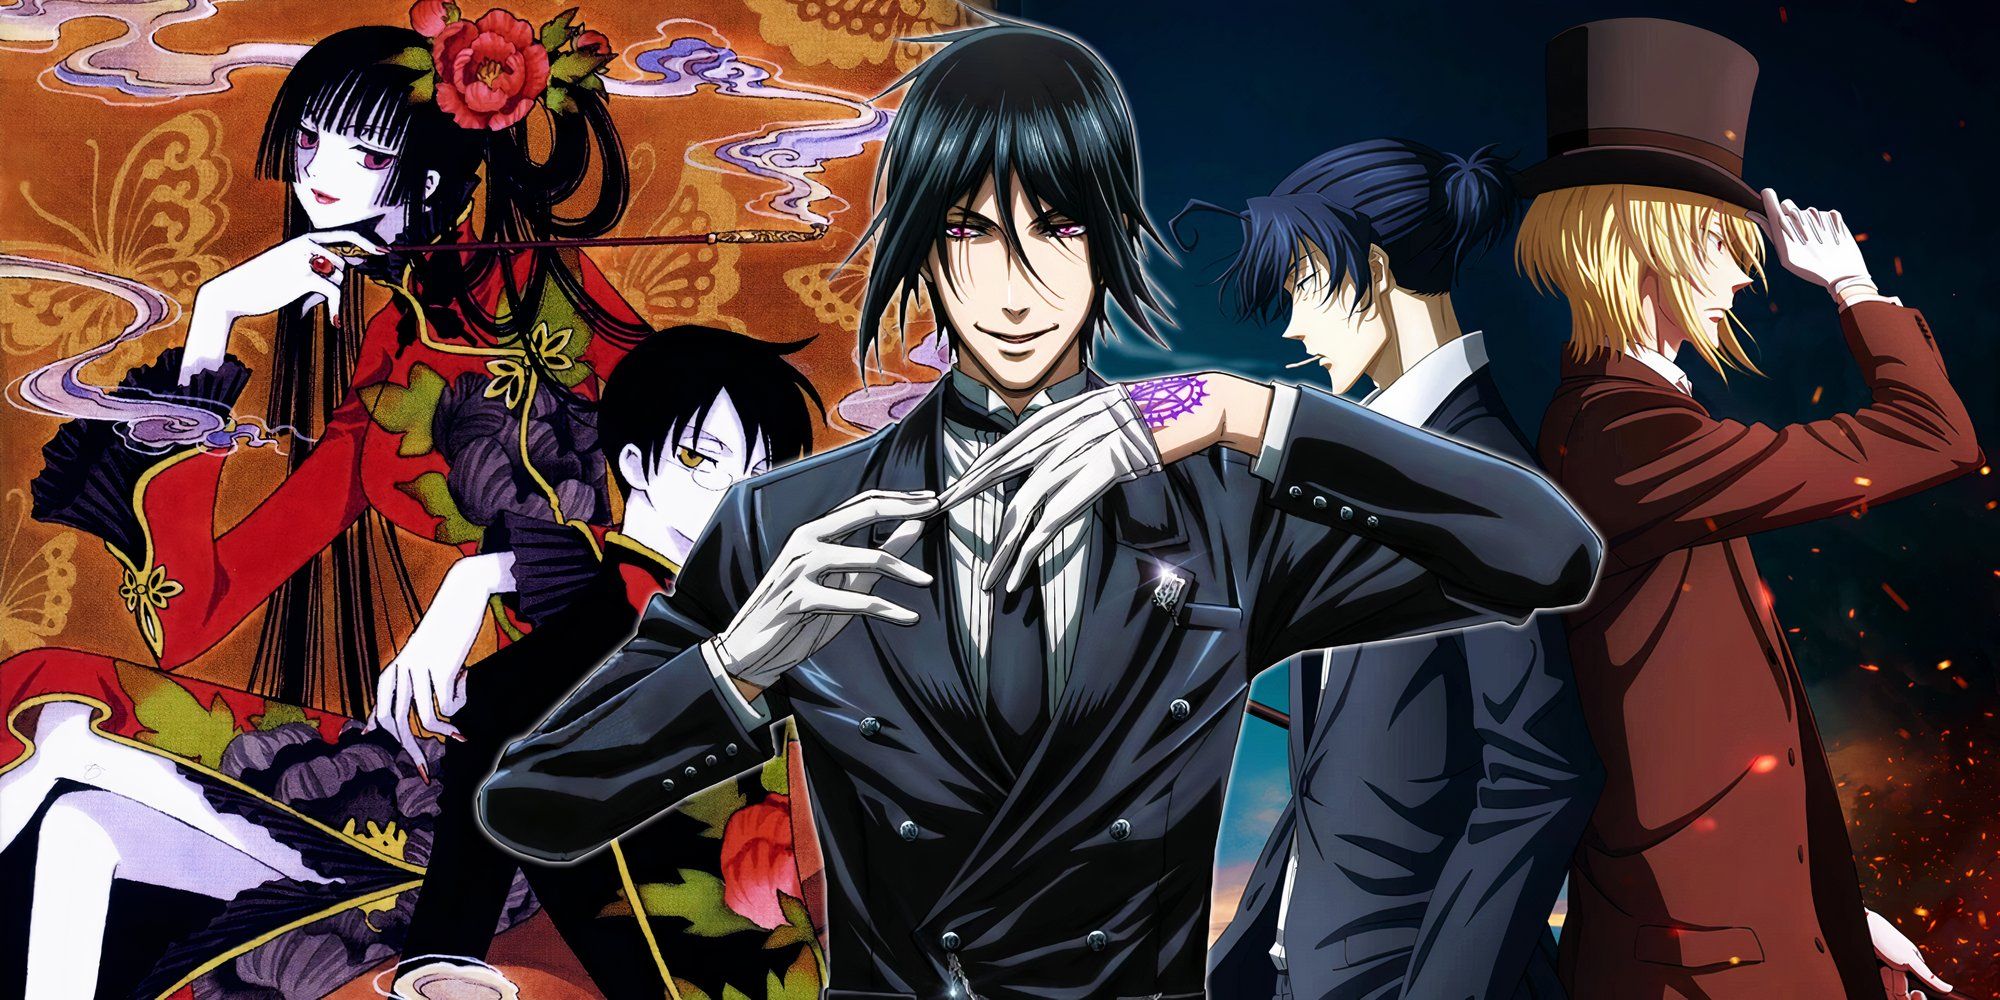 sebastian from black butler in the center taking off his glove with yuko from xxxholic in the background to the left and sherlock and moraiarty from moriarty the patriot standing back to back to the right